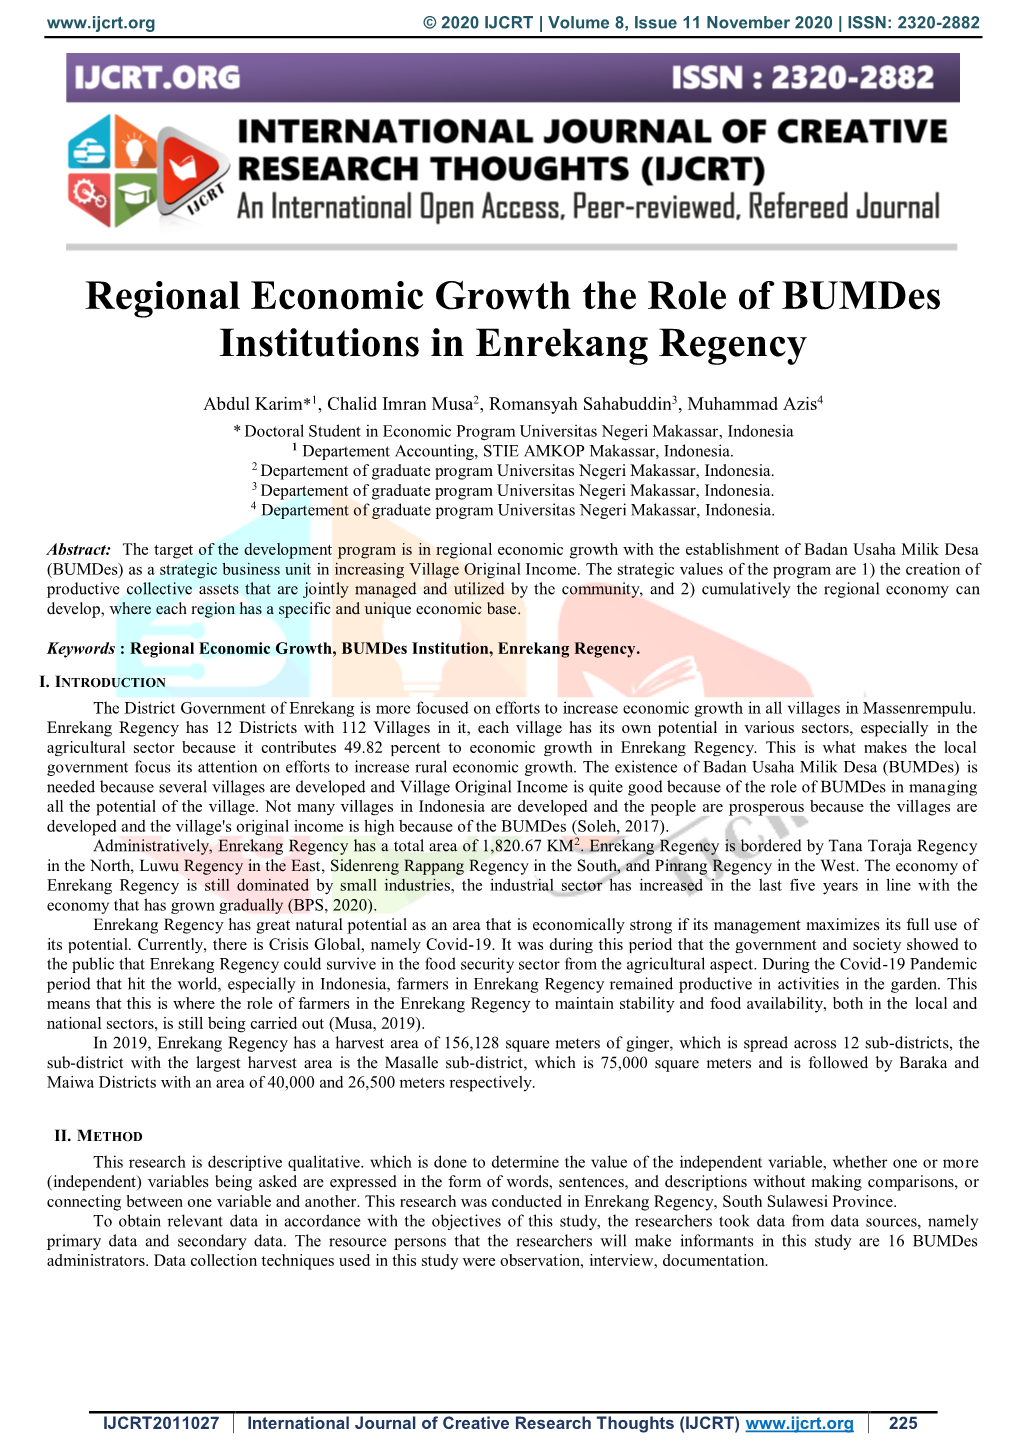 Regional Economic Growth the Role of Bumdes Institutions in Enrekang Regency